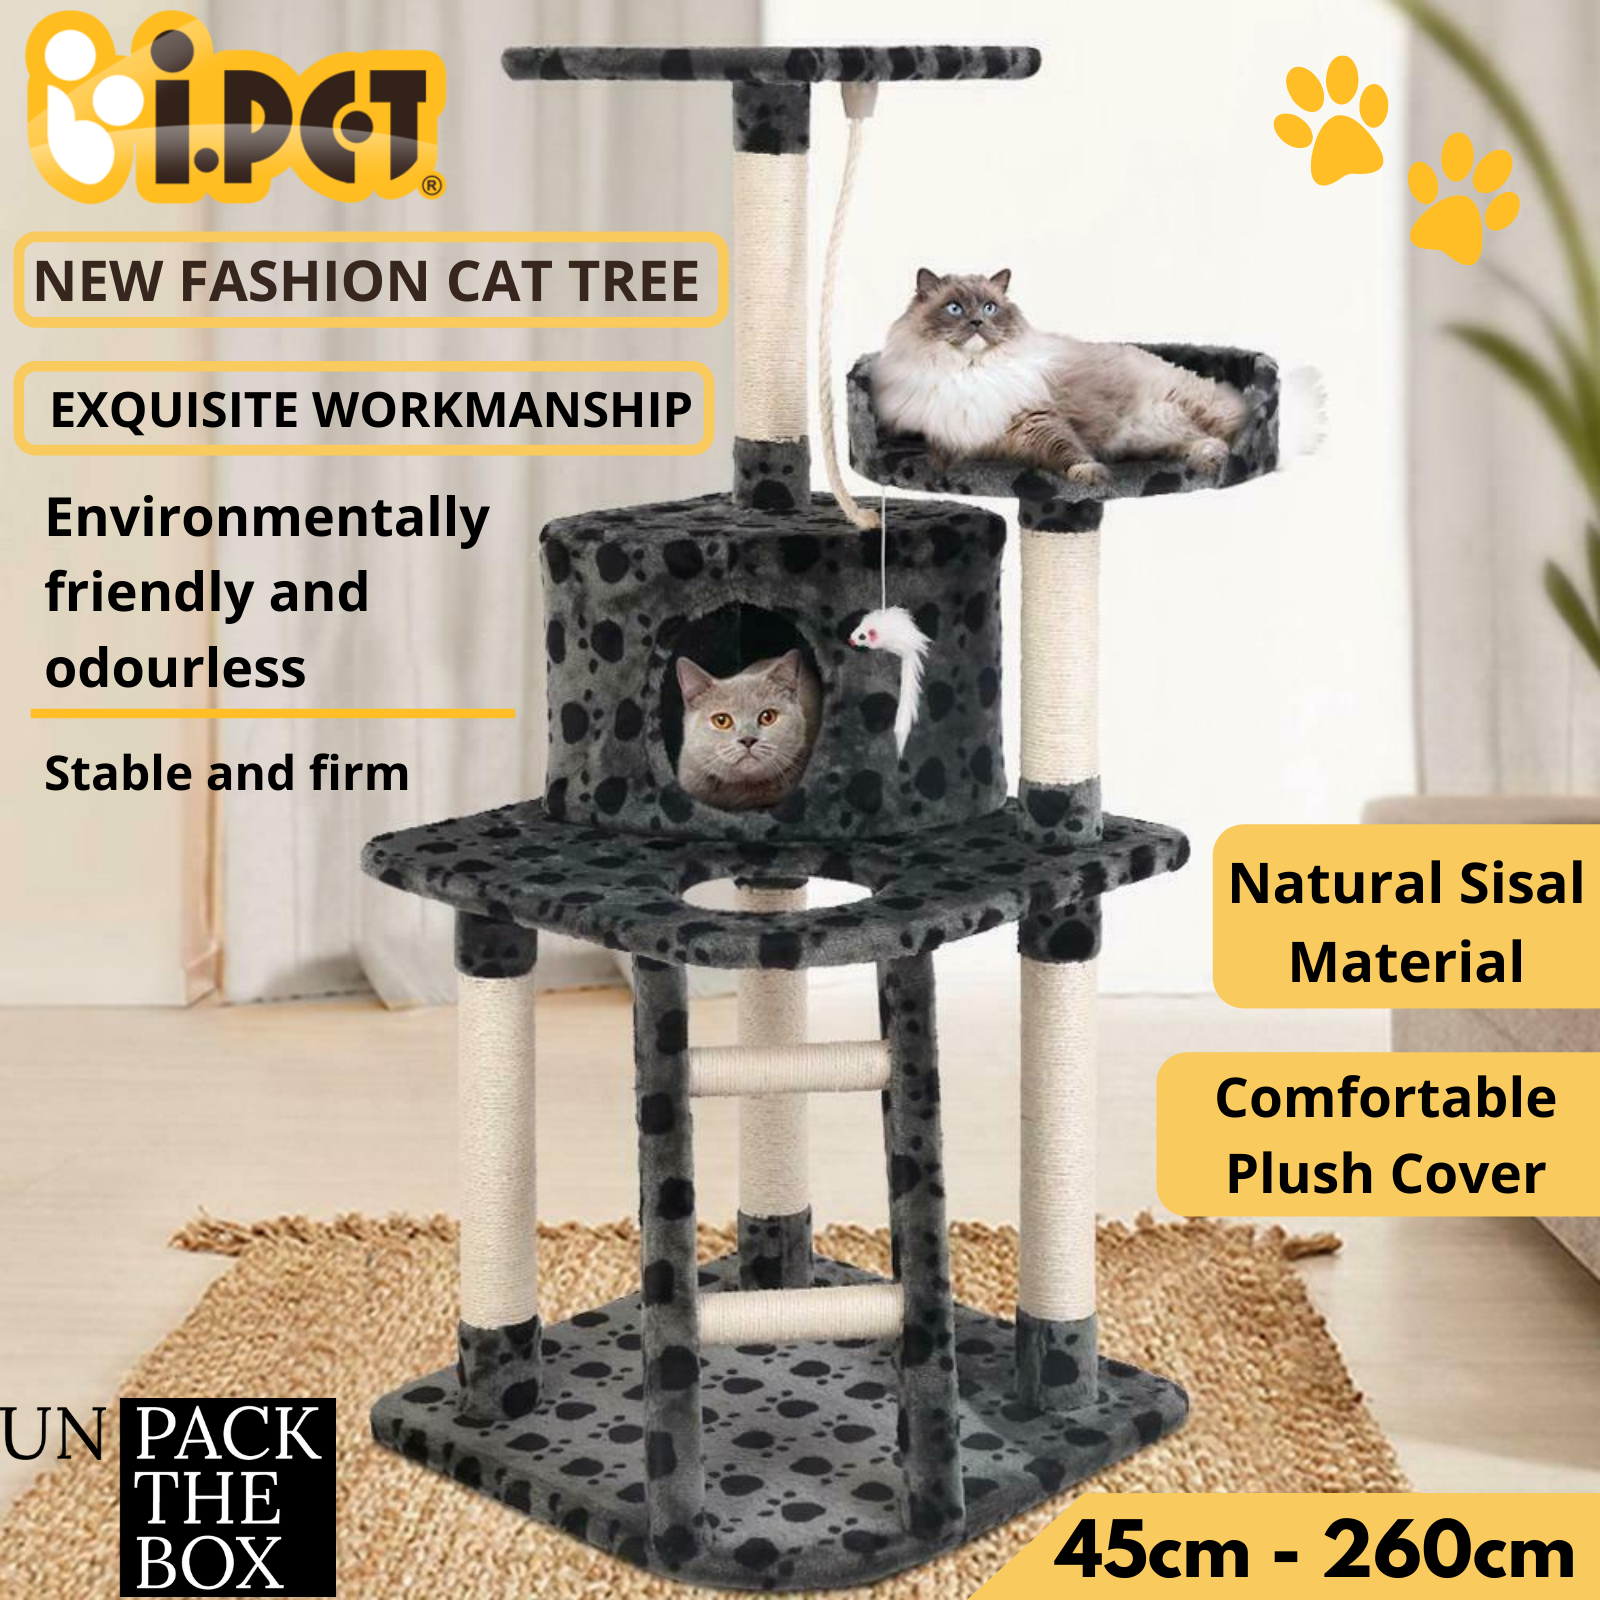 Built to satisfy the natural instincts of your precious pet, the Cat Tree include hosts of nooks & crannies for Tom & Tabby.